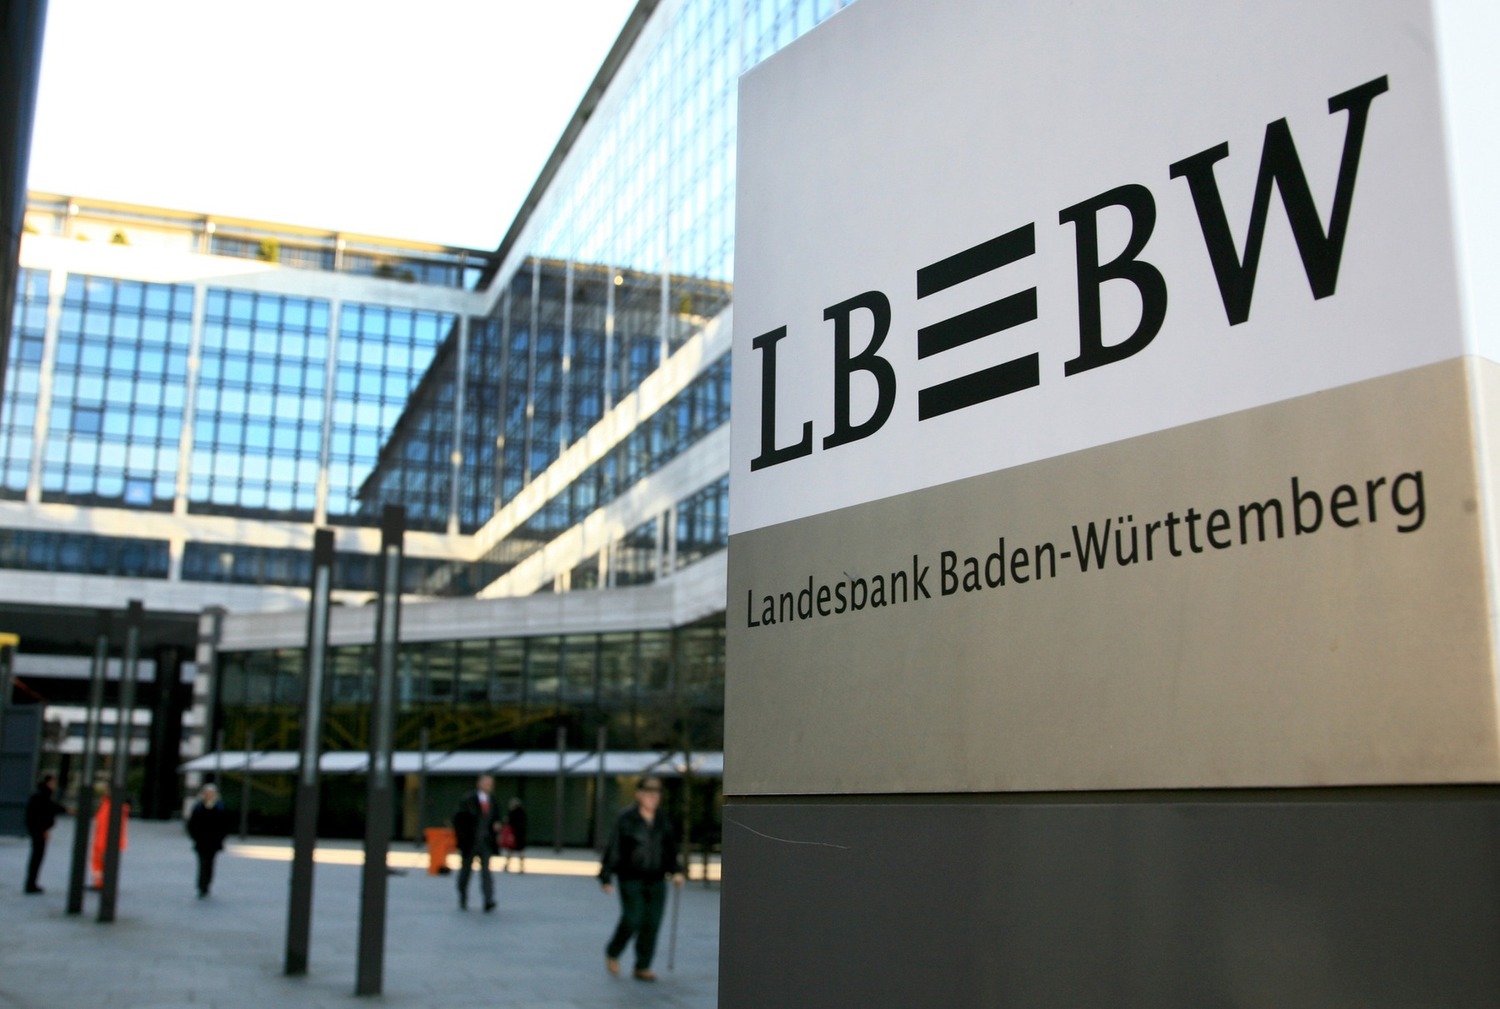 11-extraordinary-facts-about-landesbank-baden-wurttemberg